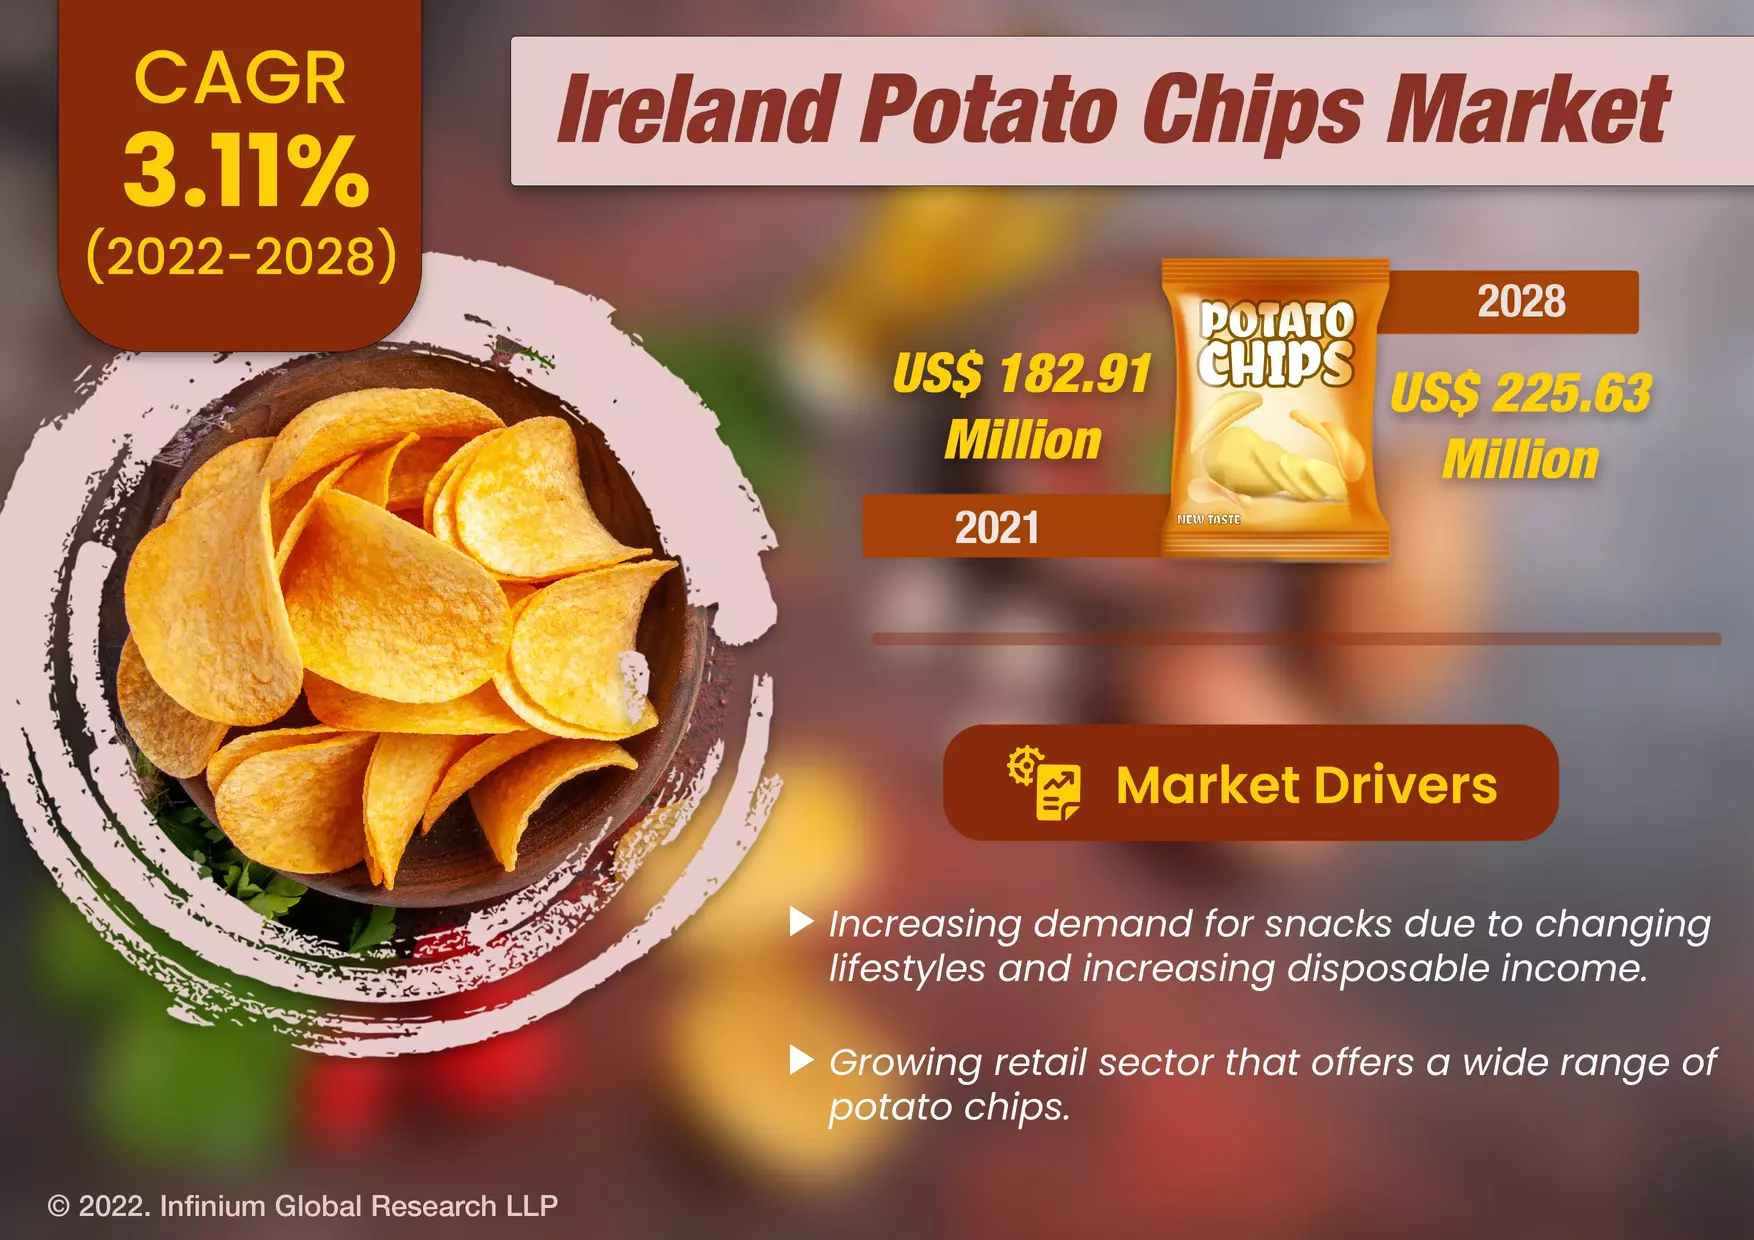 Ireland Potato Chips Market Was Valued at USD 182.91 Million in 2021 and is Expected to Reach USD 225.63 Million in 2028, with a CAGR of 3.11% During the Forecast Period 2022-2028.